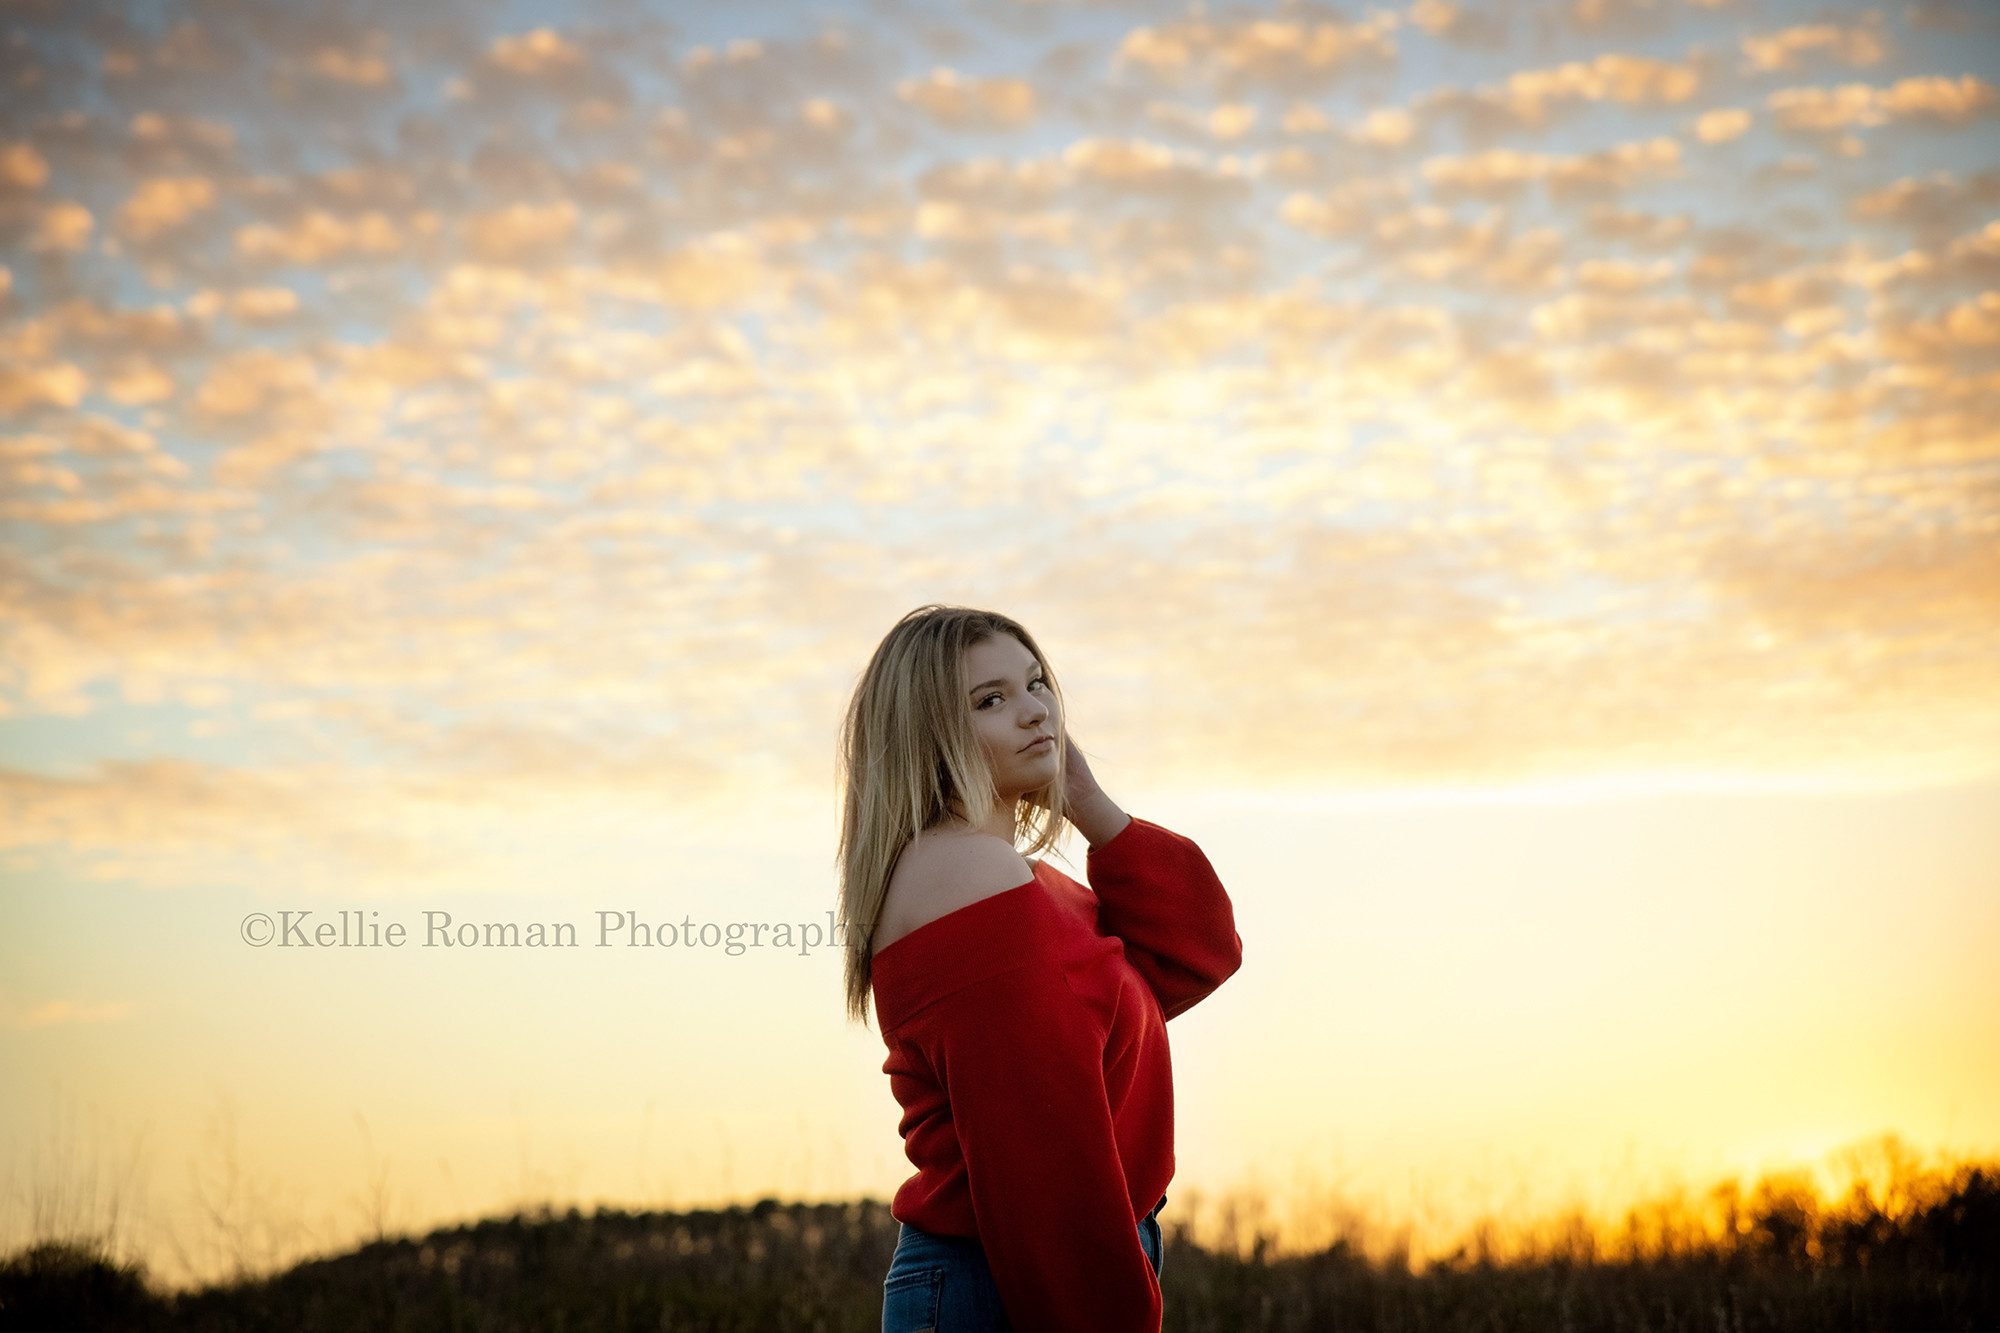 high school senior photographer a senior girl is standing in a field at sun set the sky is bright yellow with blue and small puffy clouds are everywhere the girl is wearing jeans and a red sweater and has blonde hair she has her left arm in her hair and is looking at the camera